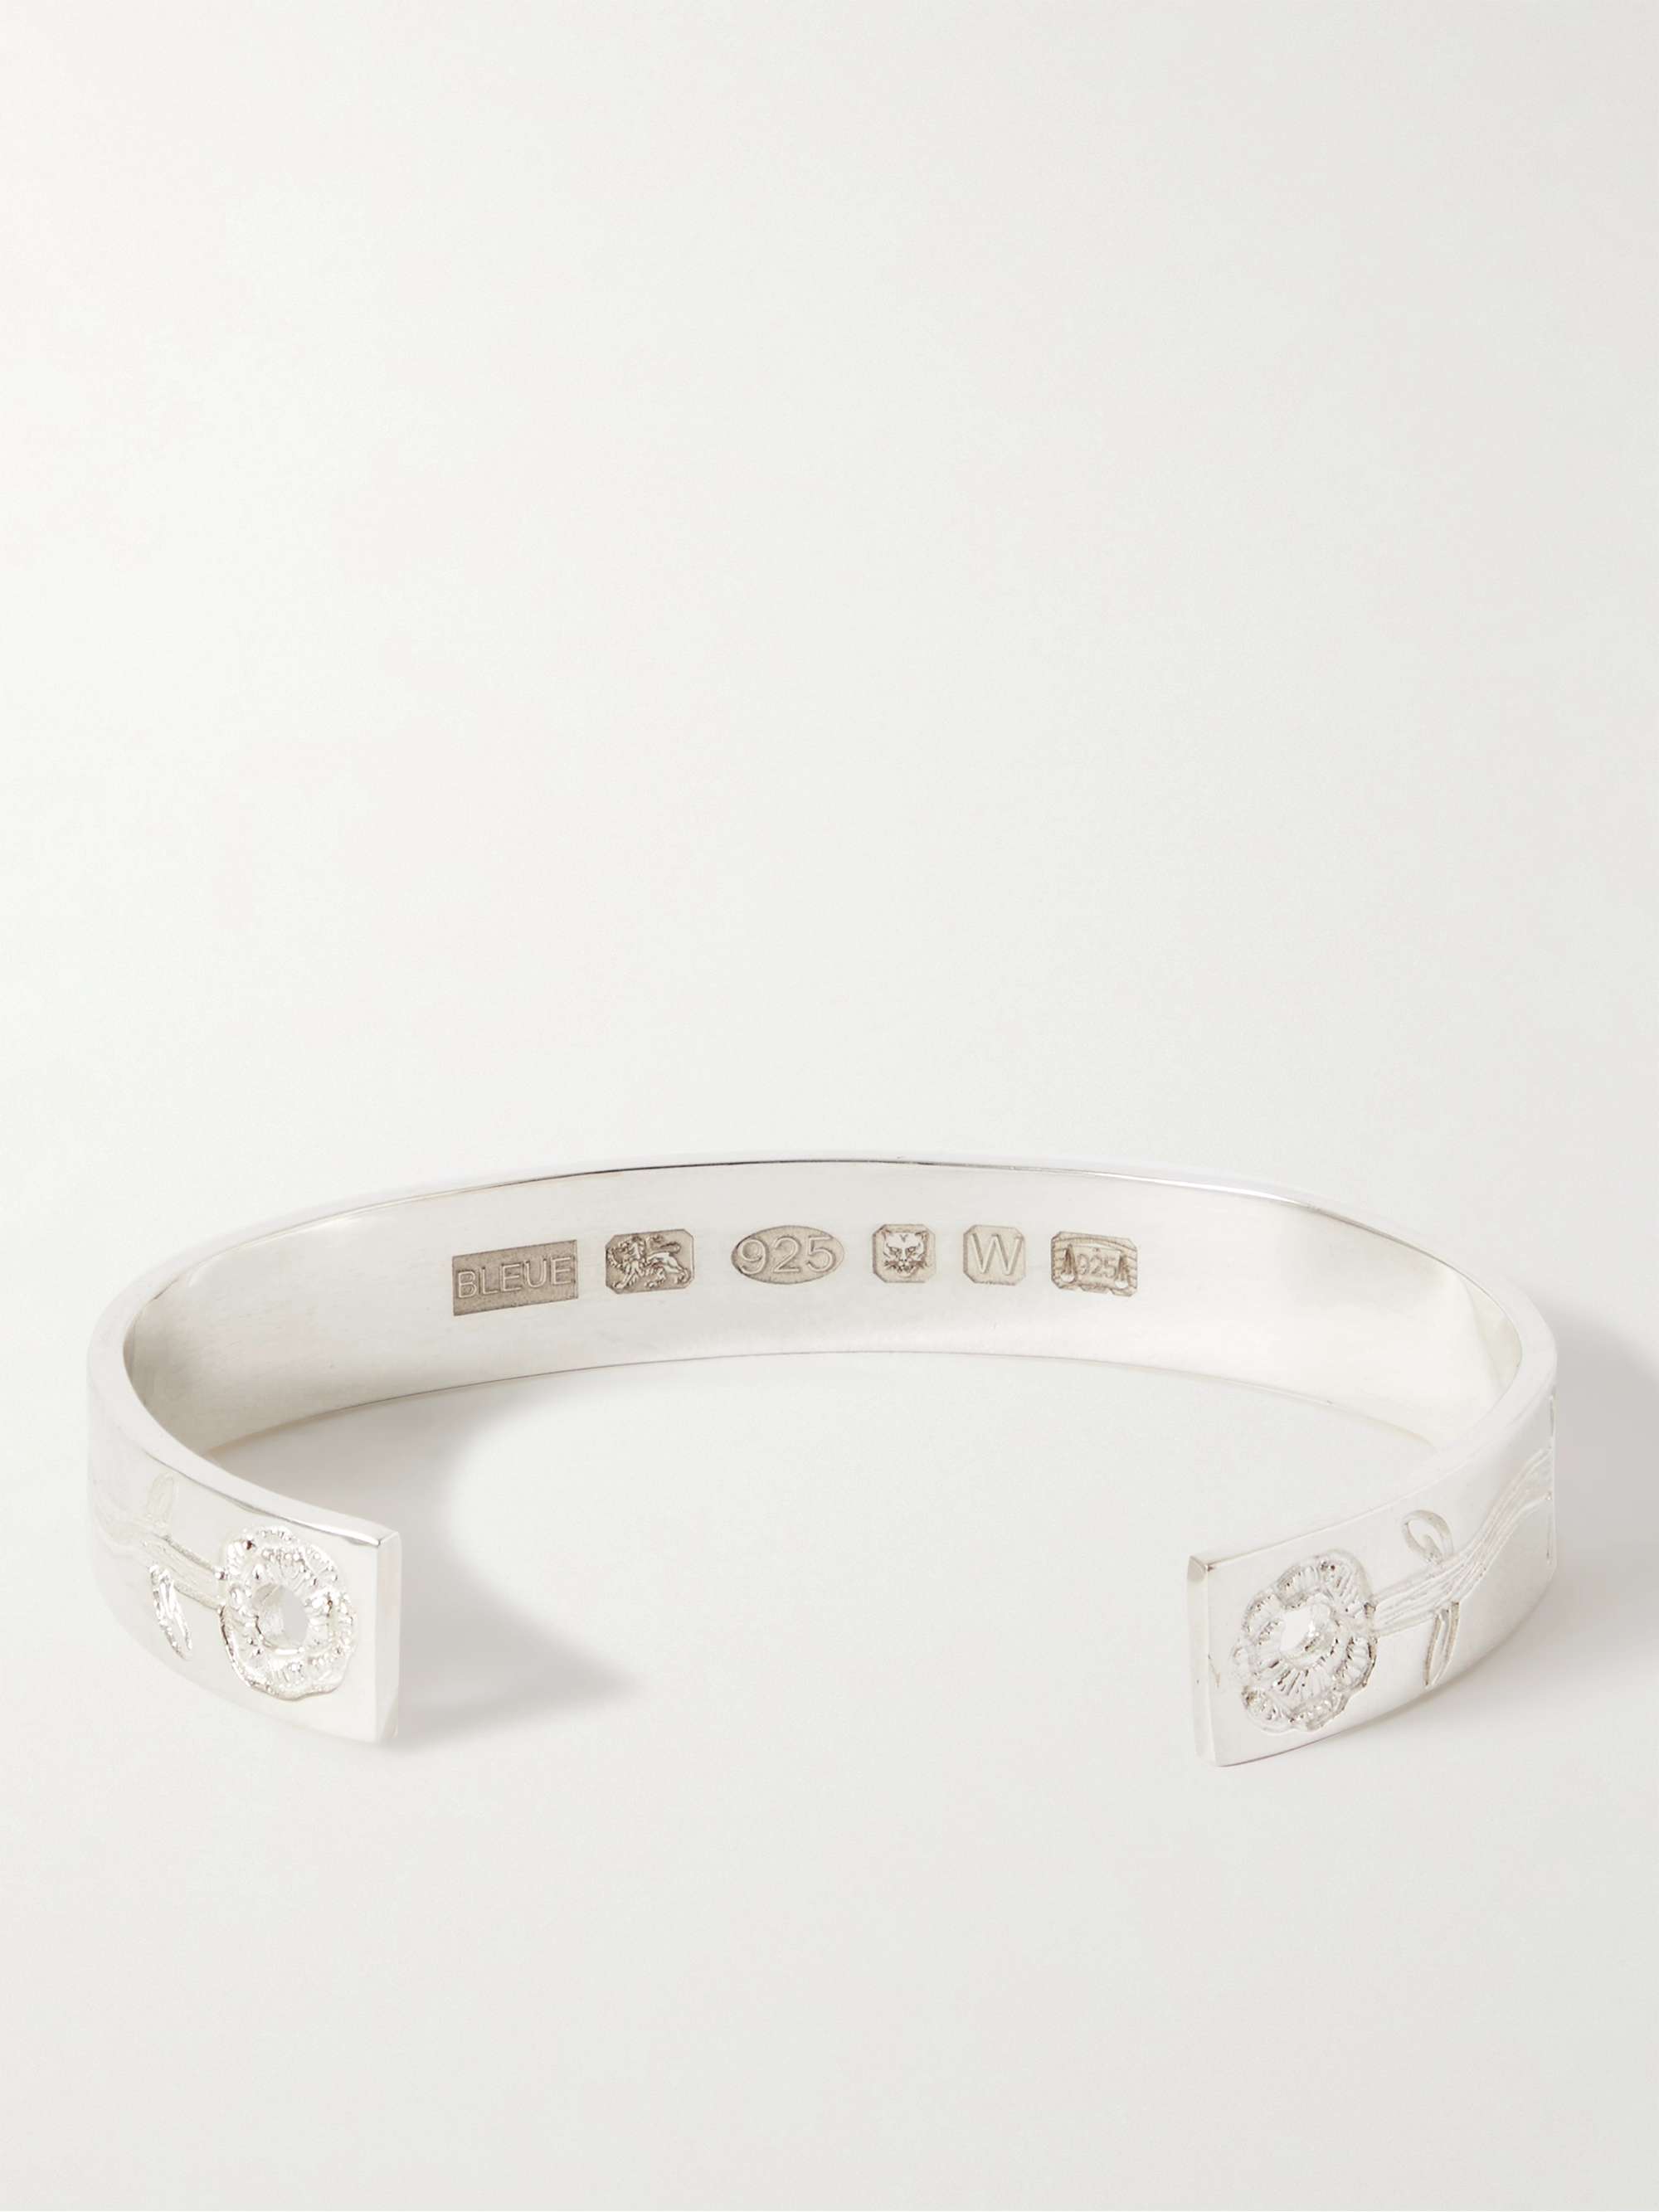 BLEUE BURNHAM The Climbing Rose Engraved Sterling Silver Cuff